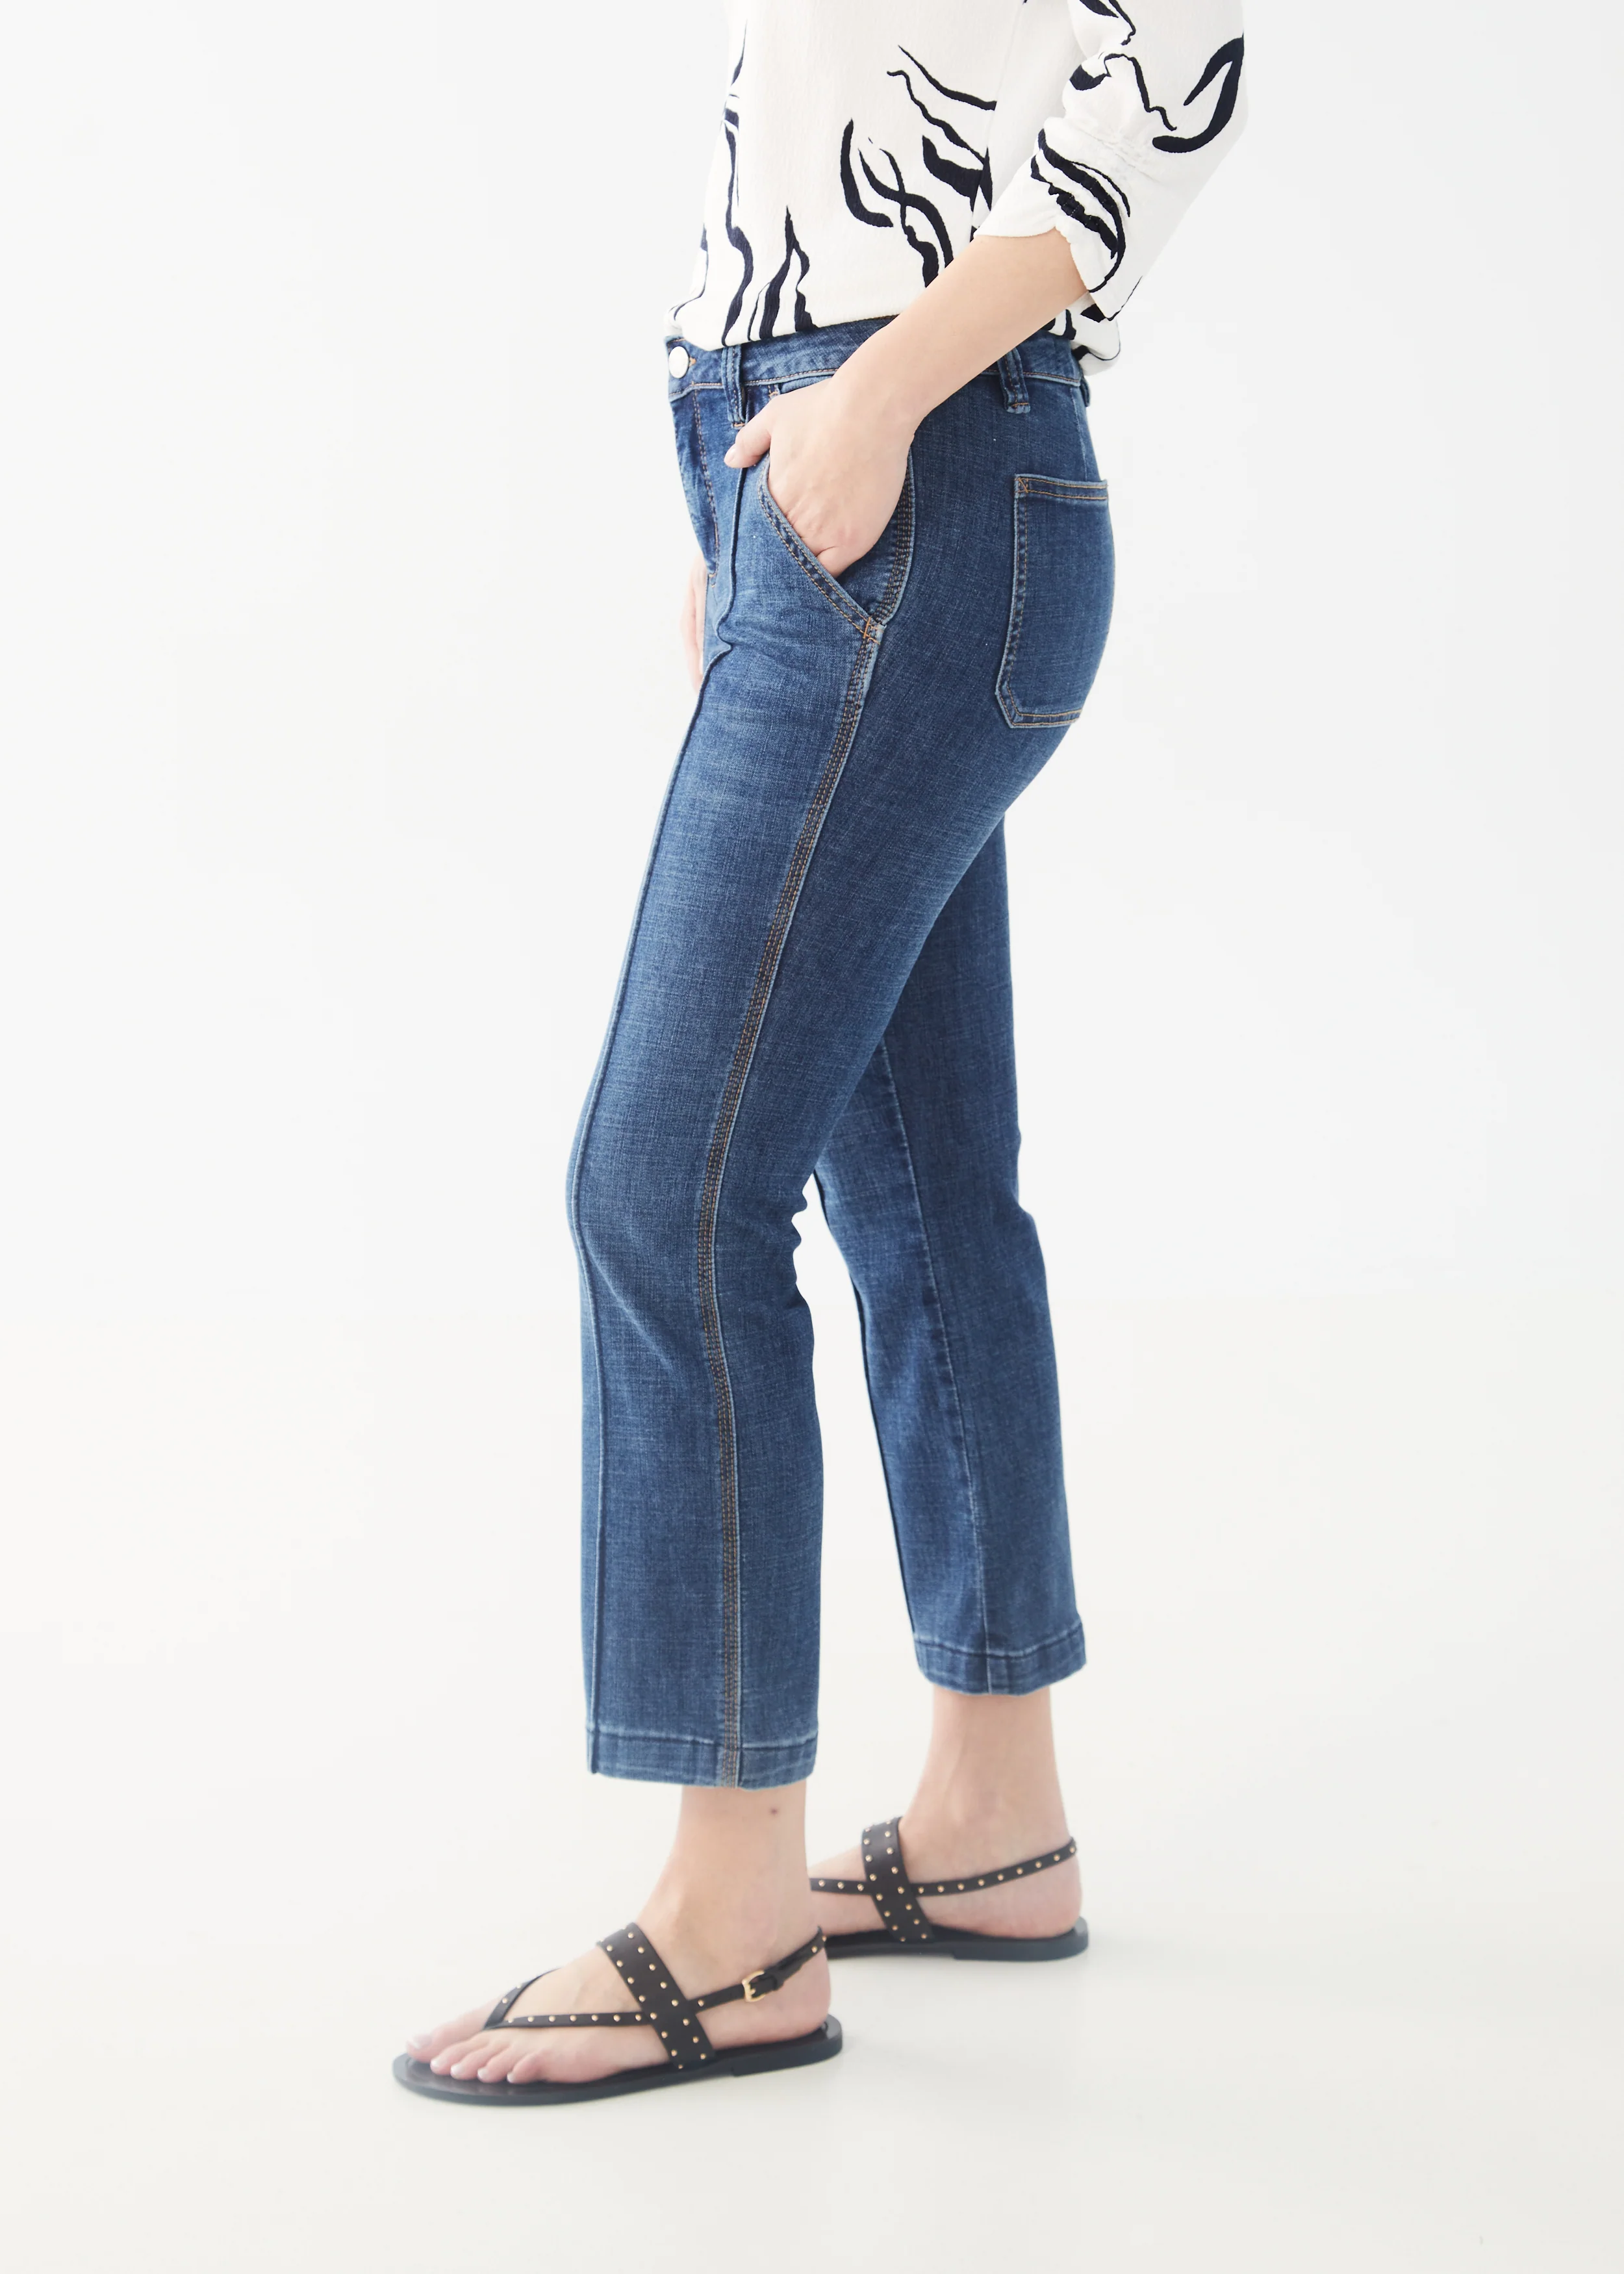 FDJ Olivia Boot Crop - Med. Dark Clothing - Bottoms - Denim - Opening by French Dressing Jeans | Grace the Boutique